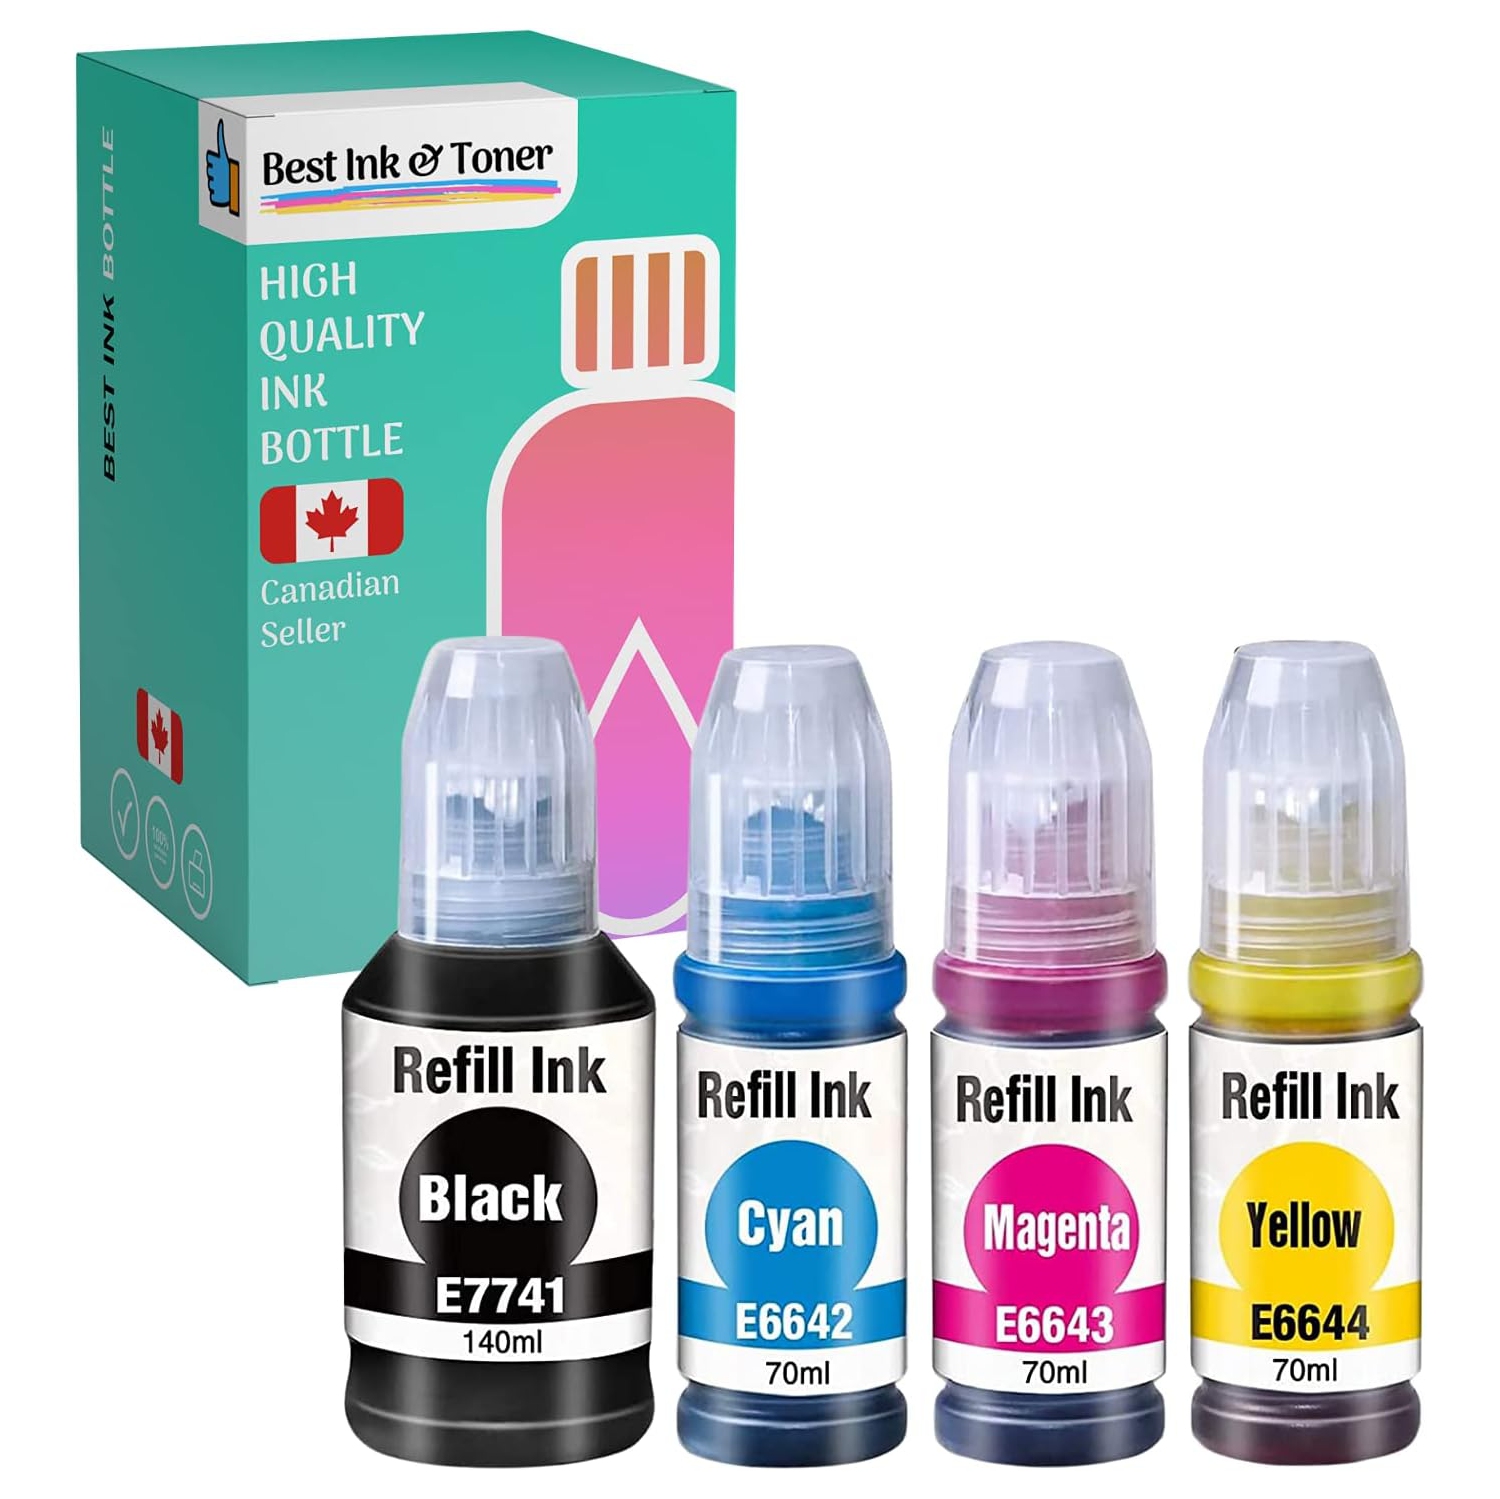 Bestink Compatible Ink Bottle Replacements for 774 & 664 (1 Black, 1 Cyan, 1 Magenta, 1 Yellow, 4-Pack) T774, T664 for use in Expression ET-3600, Workforce Series ET-16500,ET-4550